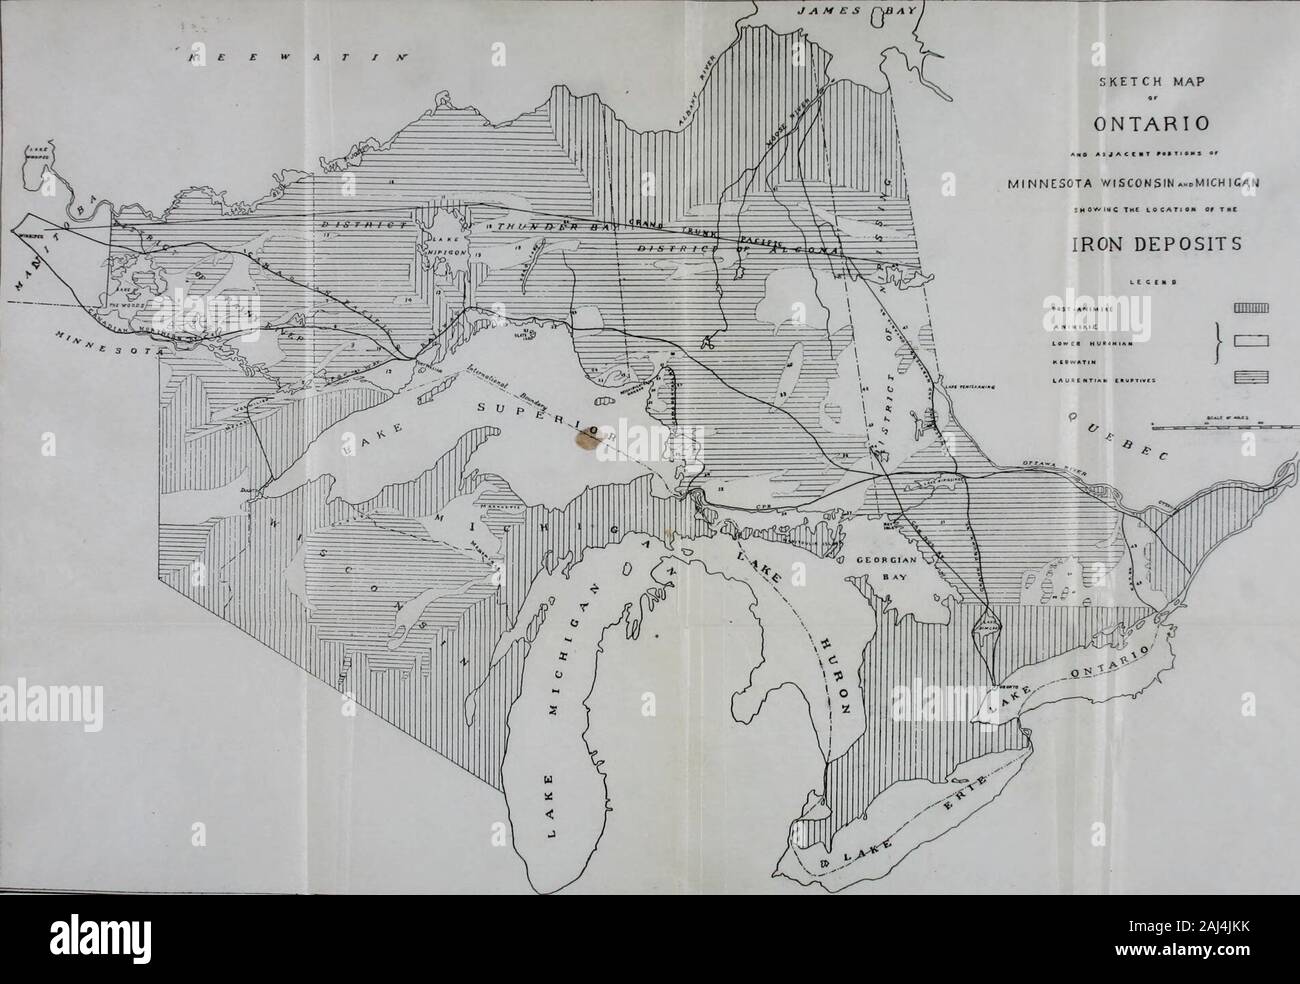 Transactions . JAMES lB A Y i KEEWATIN SKETCH MAP ONTARIO. The Iron* Ores of Ontario 113 On the accompanying map the areas of Keewatin and Lower Hu-ronian are outlined with as great accuracy as our present knowledgeof the unsettled regions of Ontario will permit. It has not provedpossible to show them separately on a small scale map even whenthe information was at hand to do so. So far little iron ore ofcommercial value has been found in the Lower Huronian areas.In Deroche township north of Sault Ste. Marie, some prospectinghas been done with fair results. In Long and Rutherford town-ships, Stock Photo